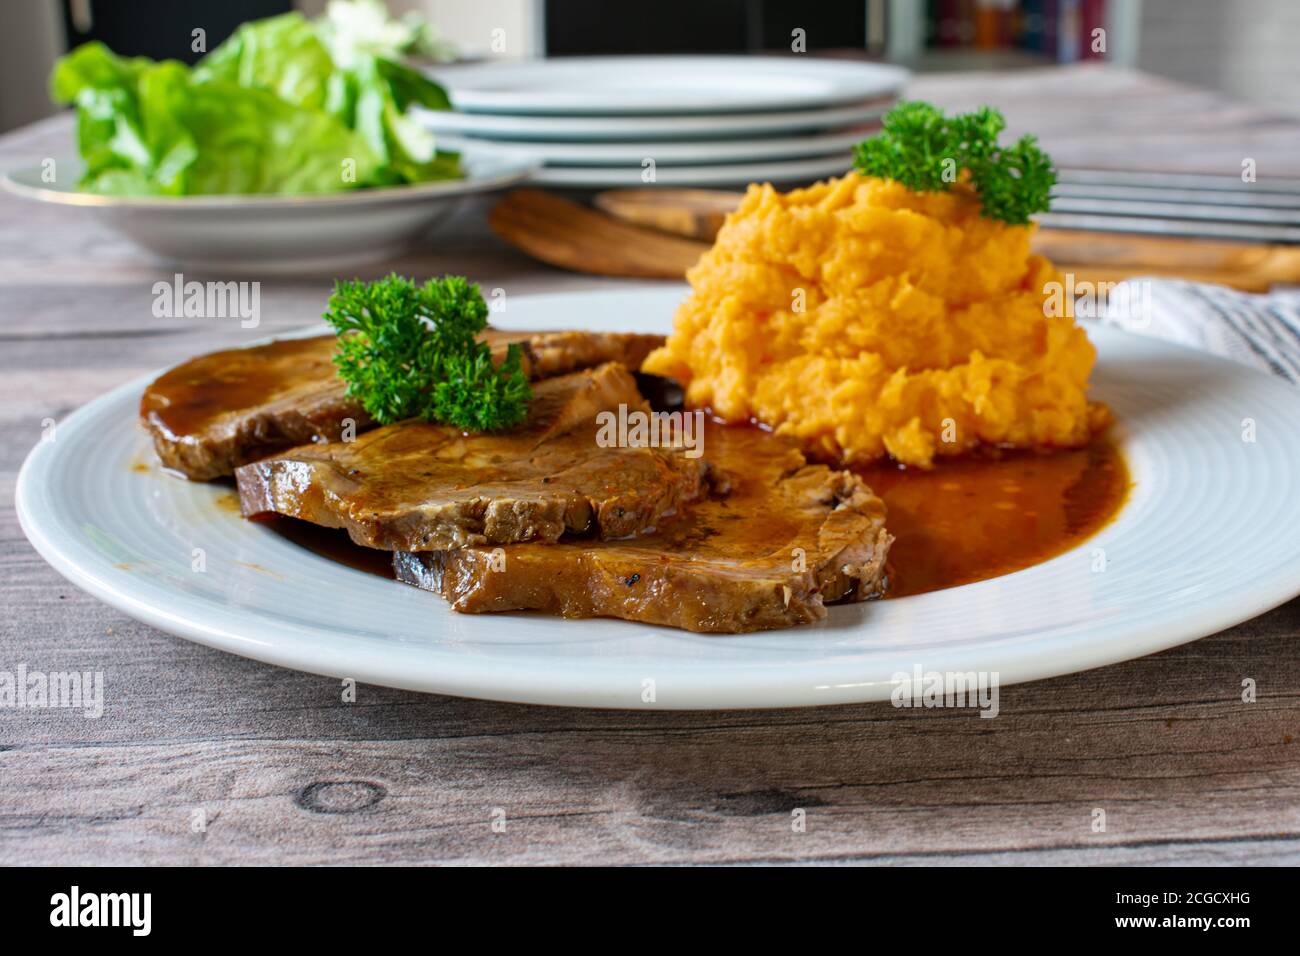 Roast pork with mashed potatoes and gravy Stock Photo